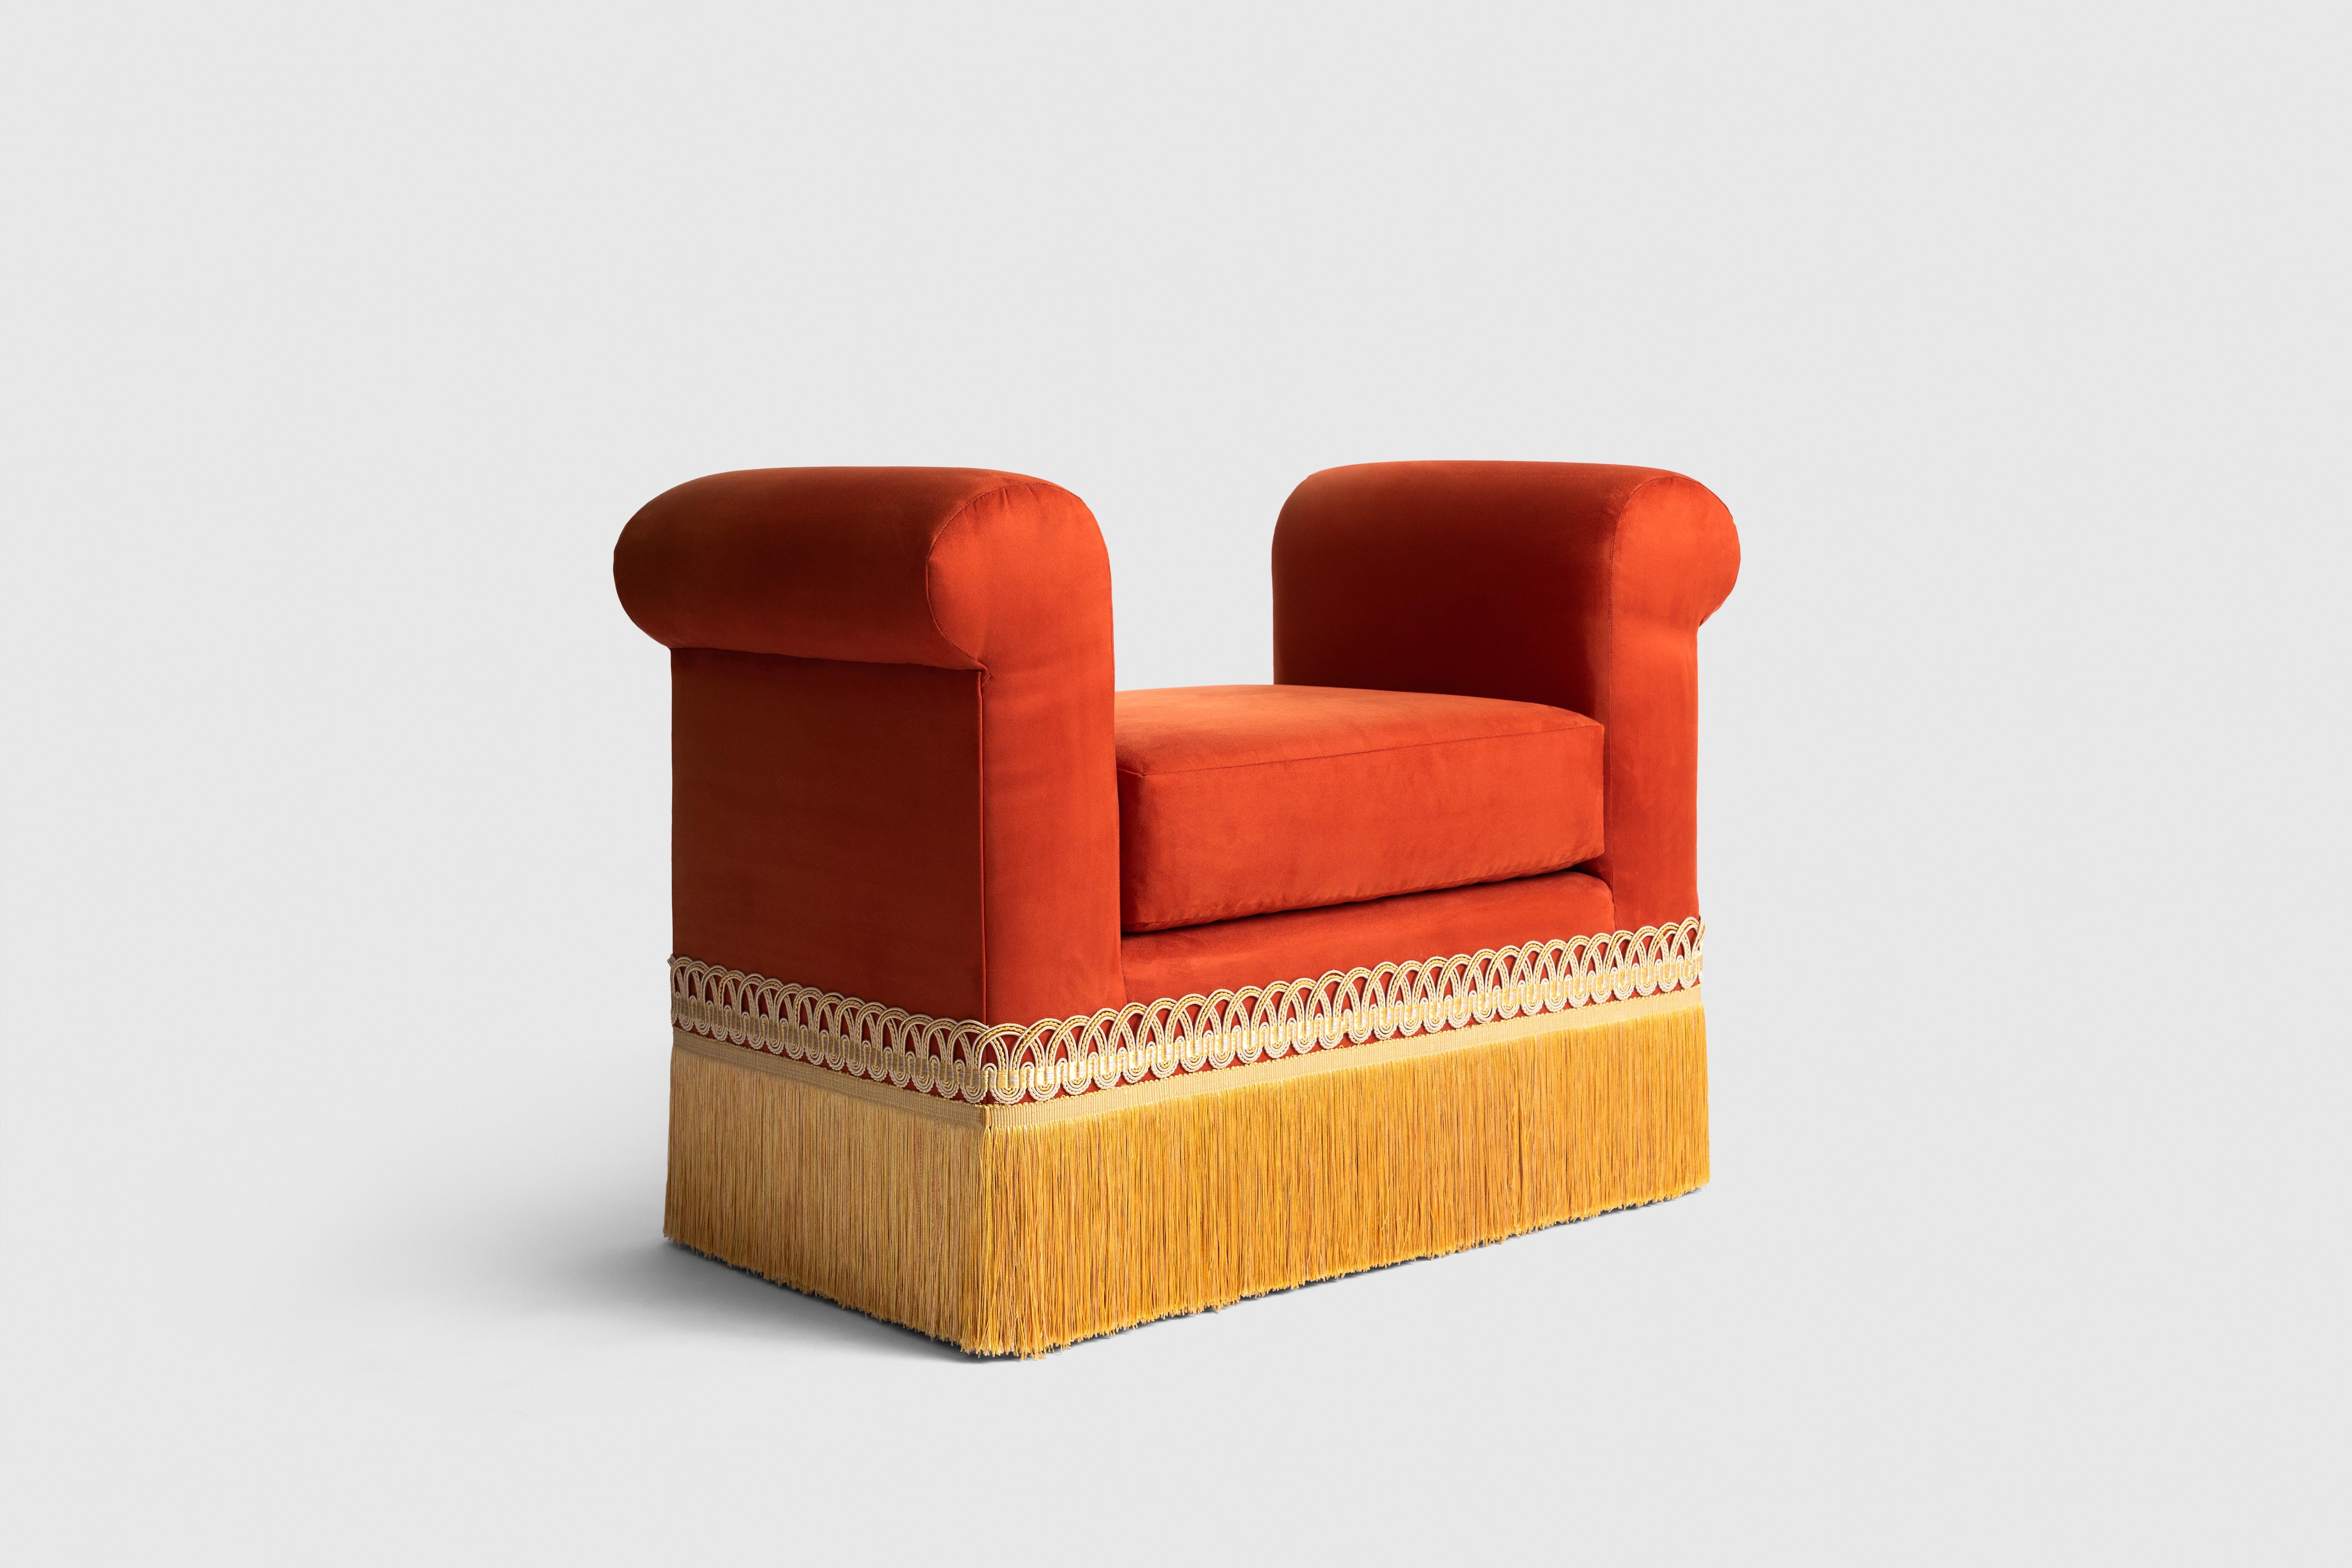 The Ravelle seat is inspired by the french trimmings. This beautiful seat made with fabric and hand made trimming by our artisans in Mexico City. 
Fernanda Loyzaga made a reinterpretation of the classic french seatings with trimmings. 

After